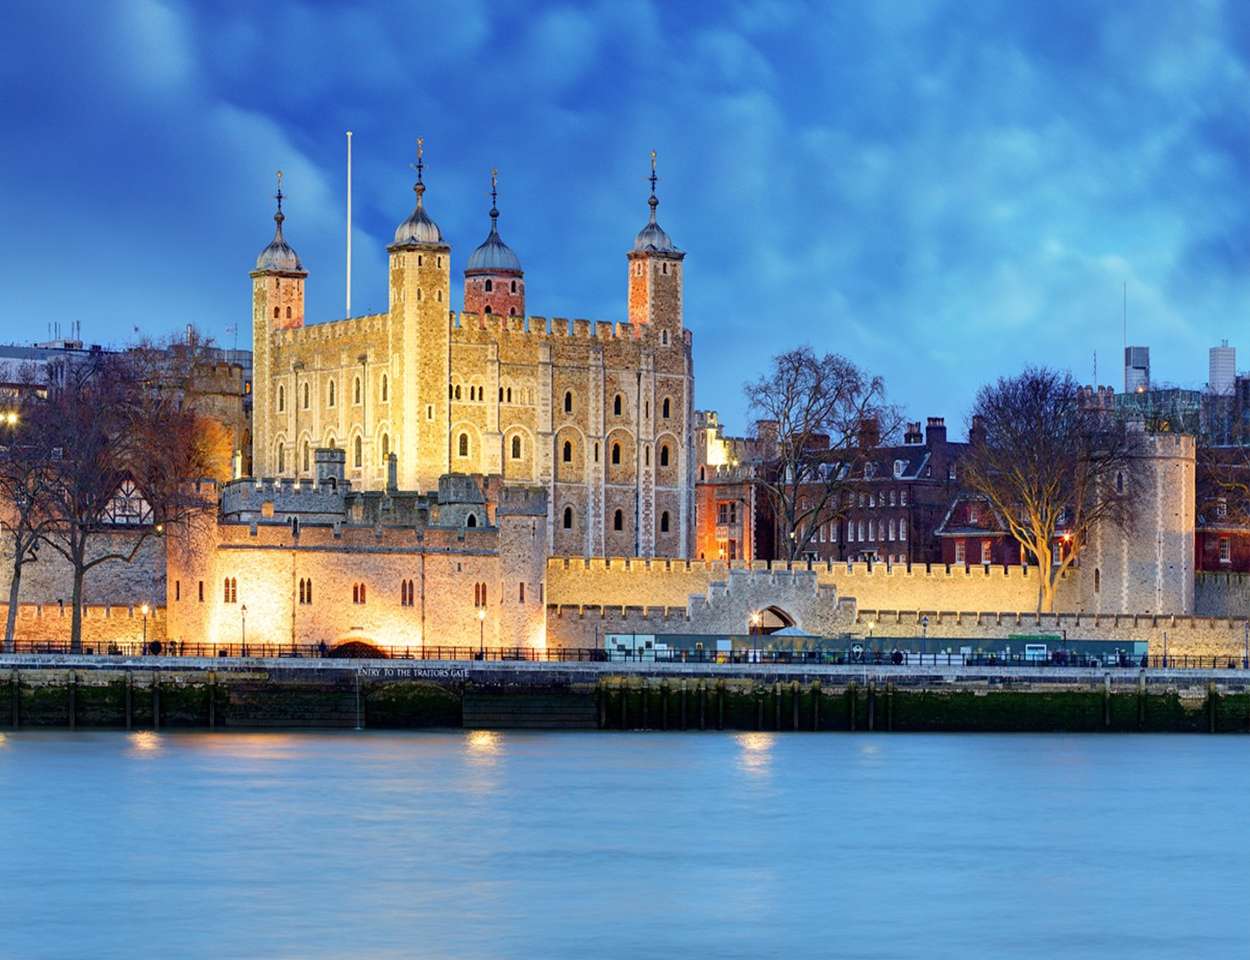 Tower of London Wielka Brytania puzzle online